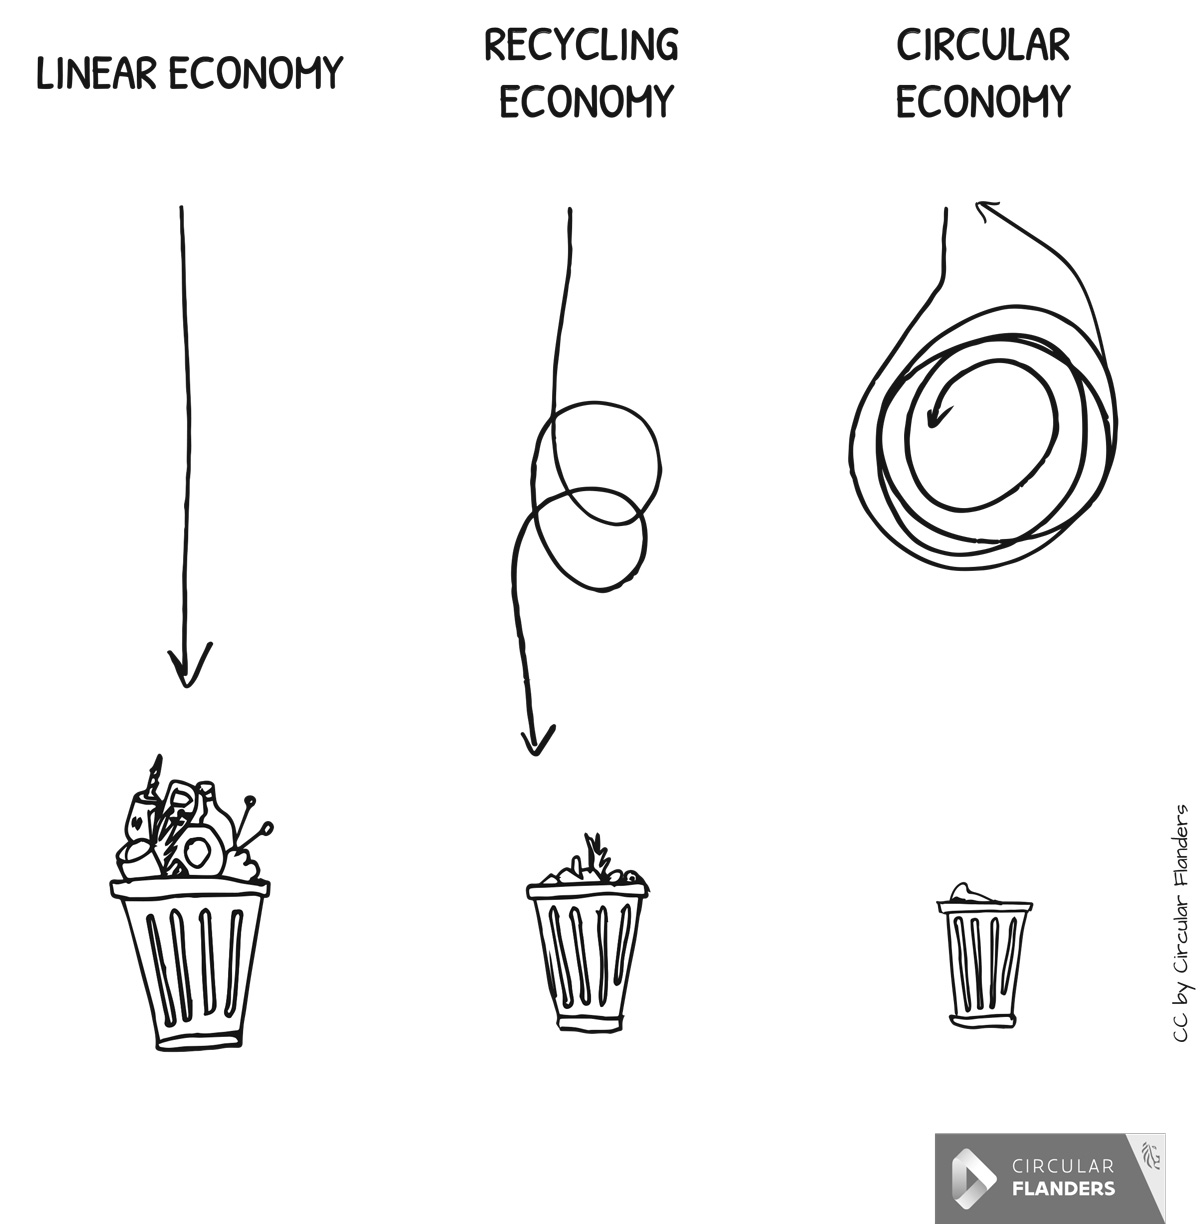 Why change to a circular economy model?